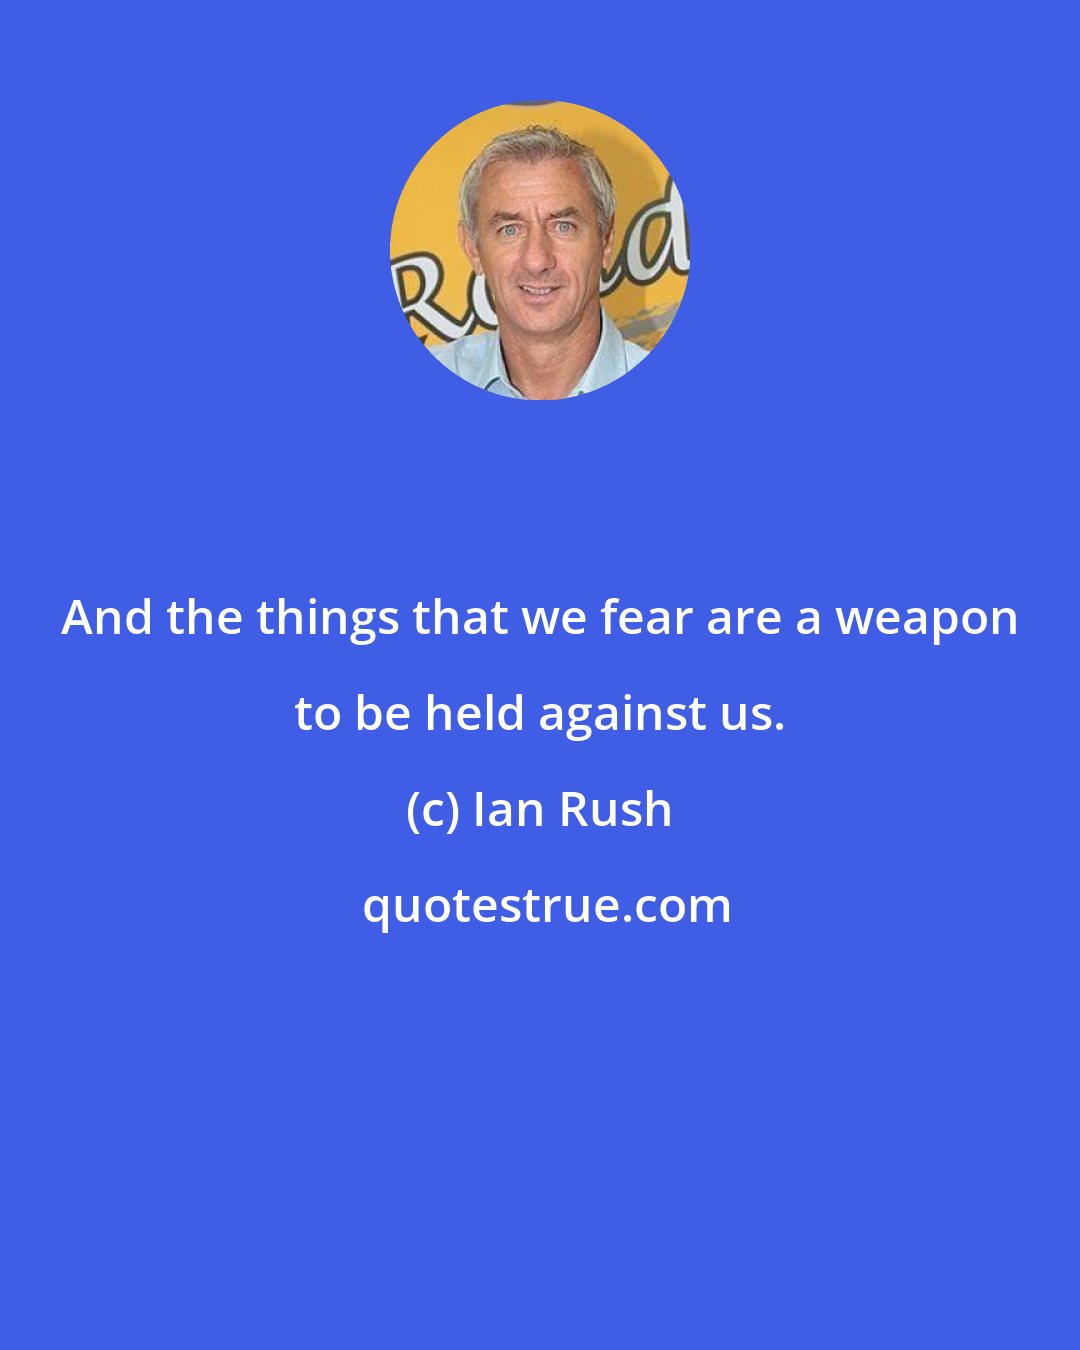 Ian Rush: And the things that we fear are a weapon to be held against us.